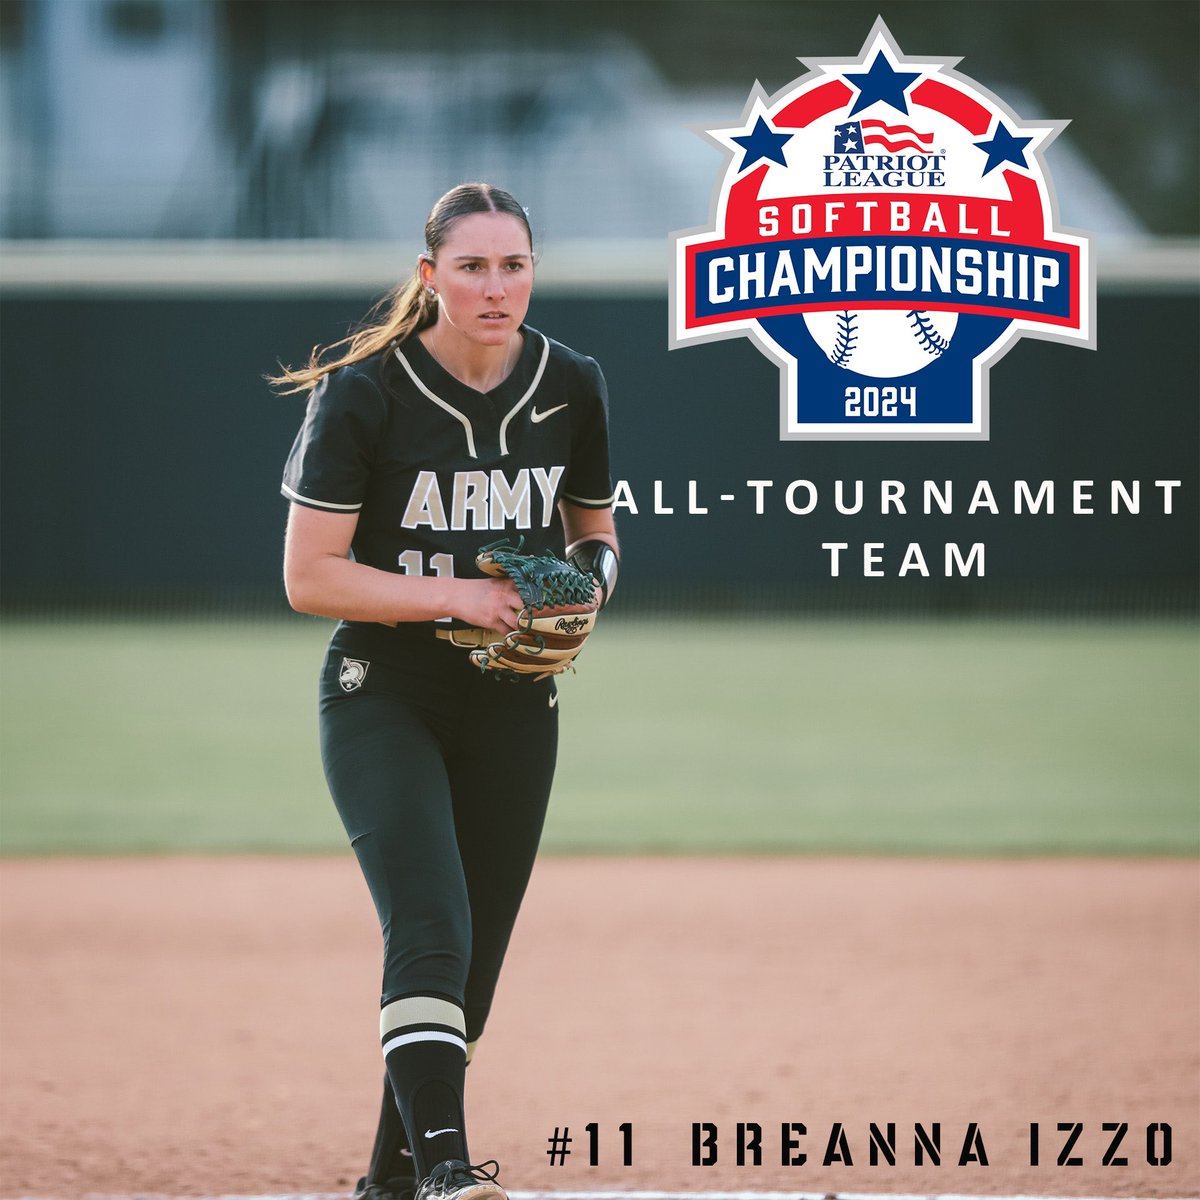 Ash and Bre showed out in Boston 👏👏 Ashton hit three-for-six with with an RBI at the Patriot League Softball Championship to land a spot on the All-Tournament team. Breanna joined her, pitching 6.2 innings only allowing one earned run. #GoArmy